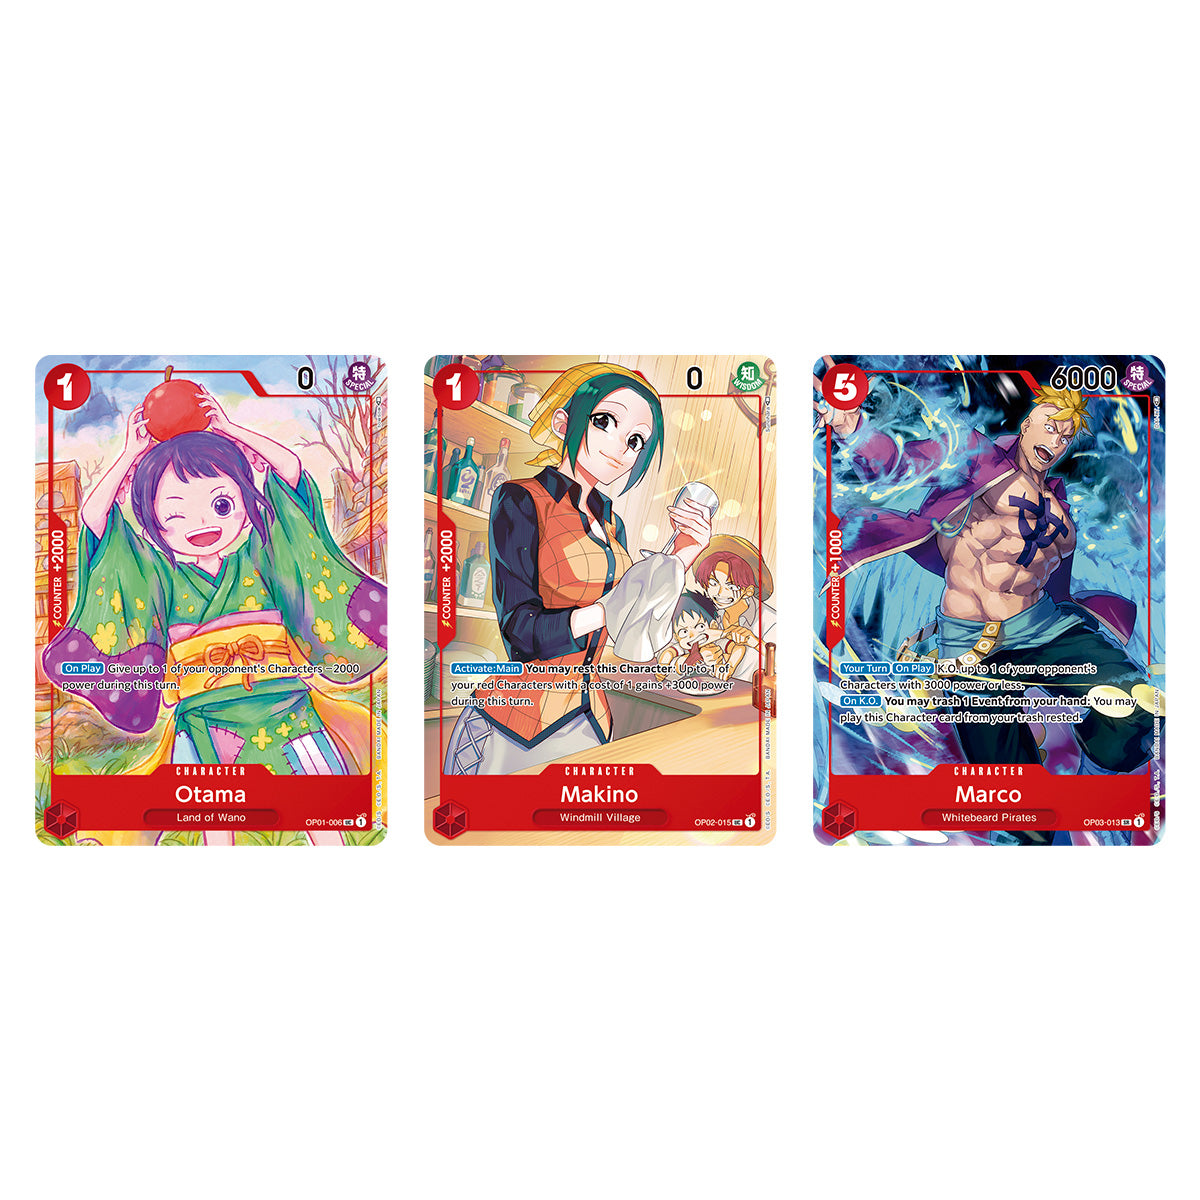 One Piece Card Game: Japanese 1st Anniversary Set